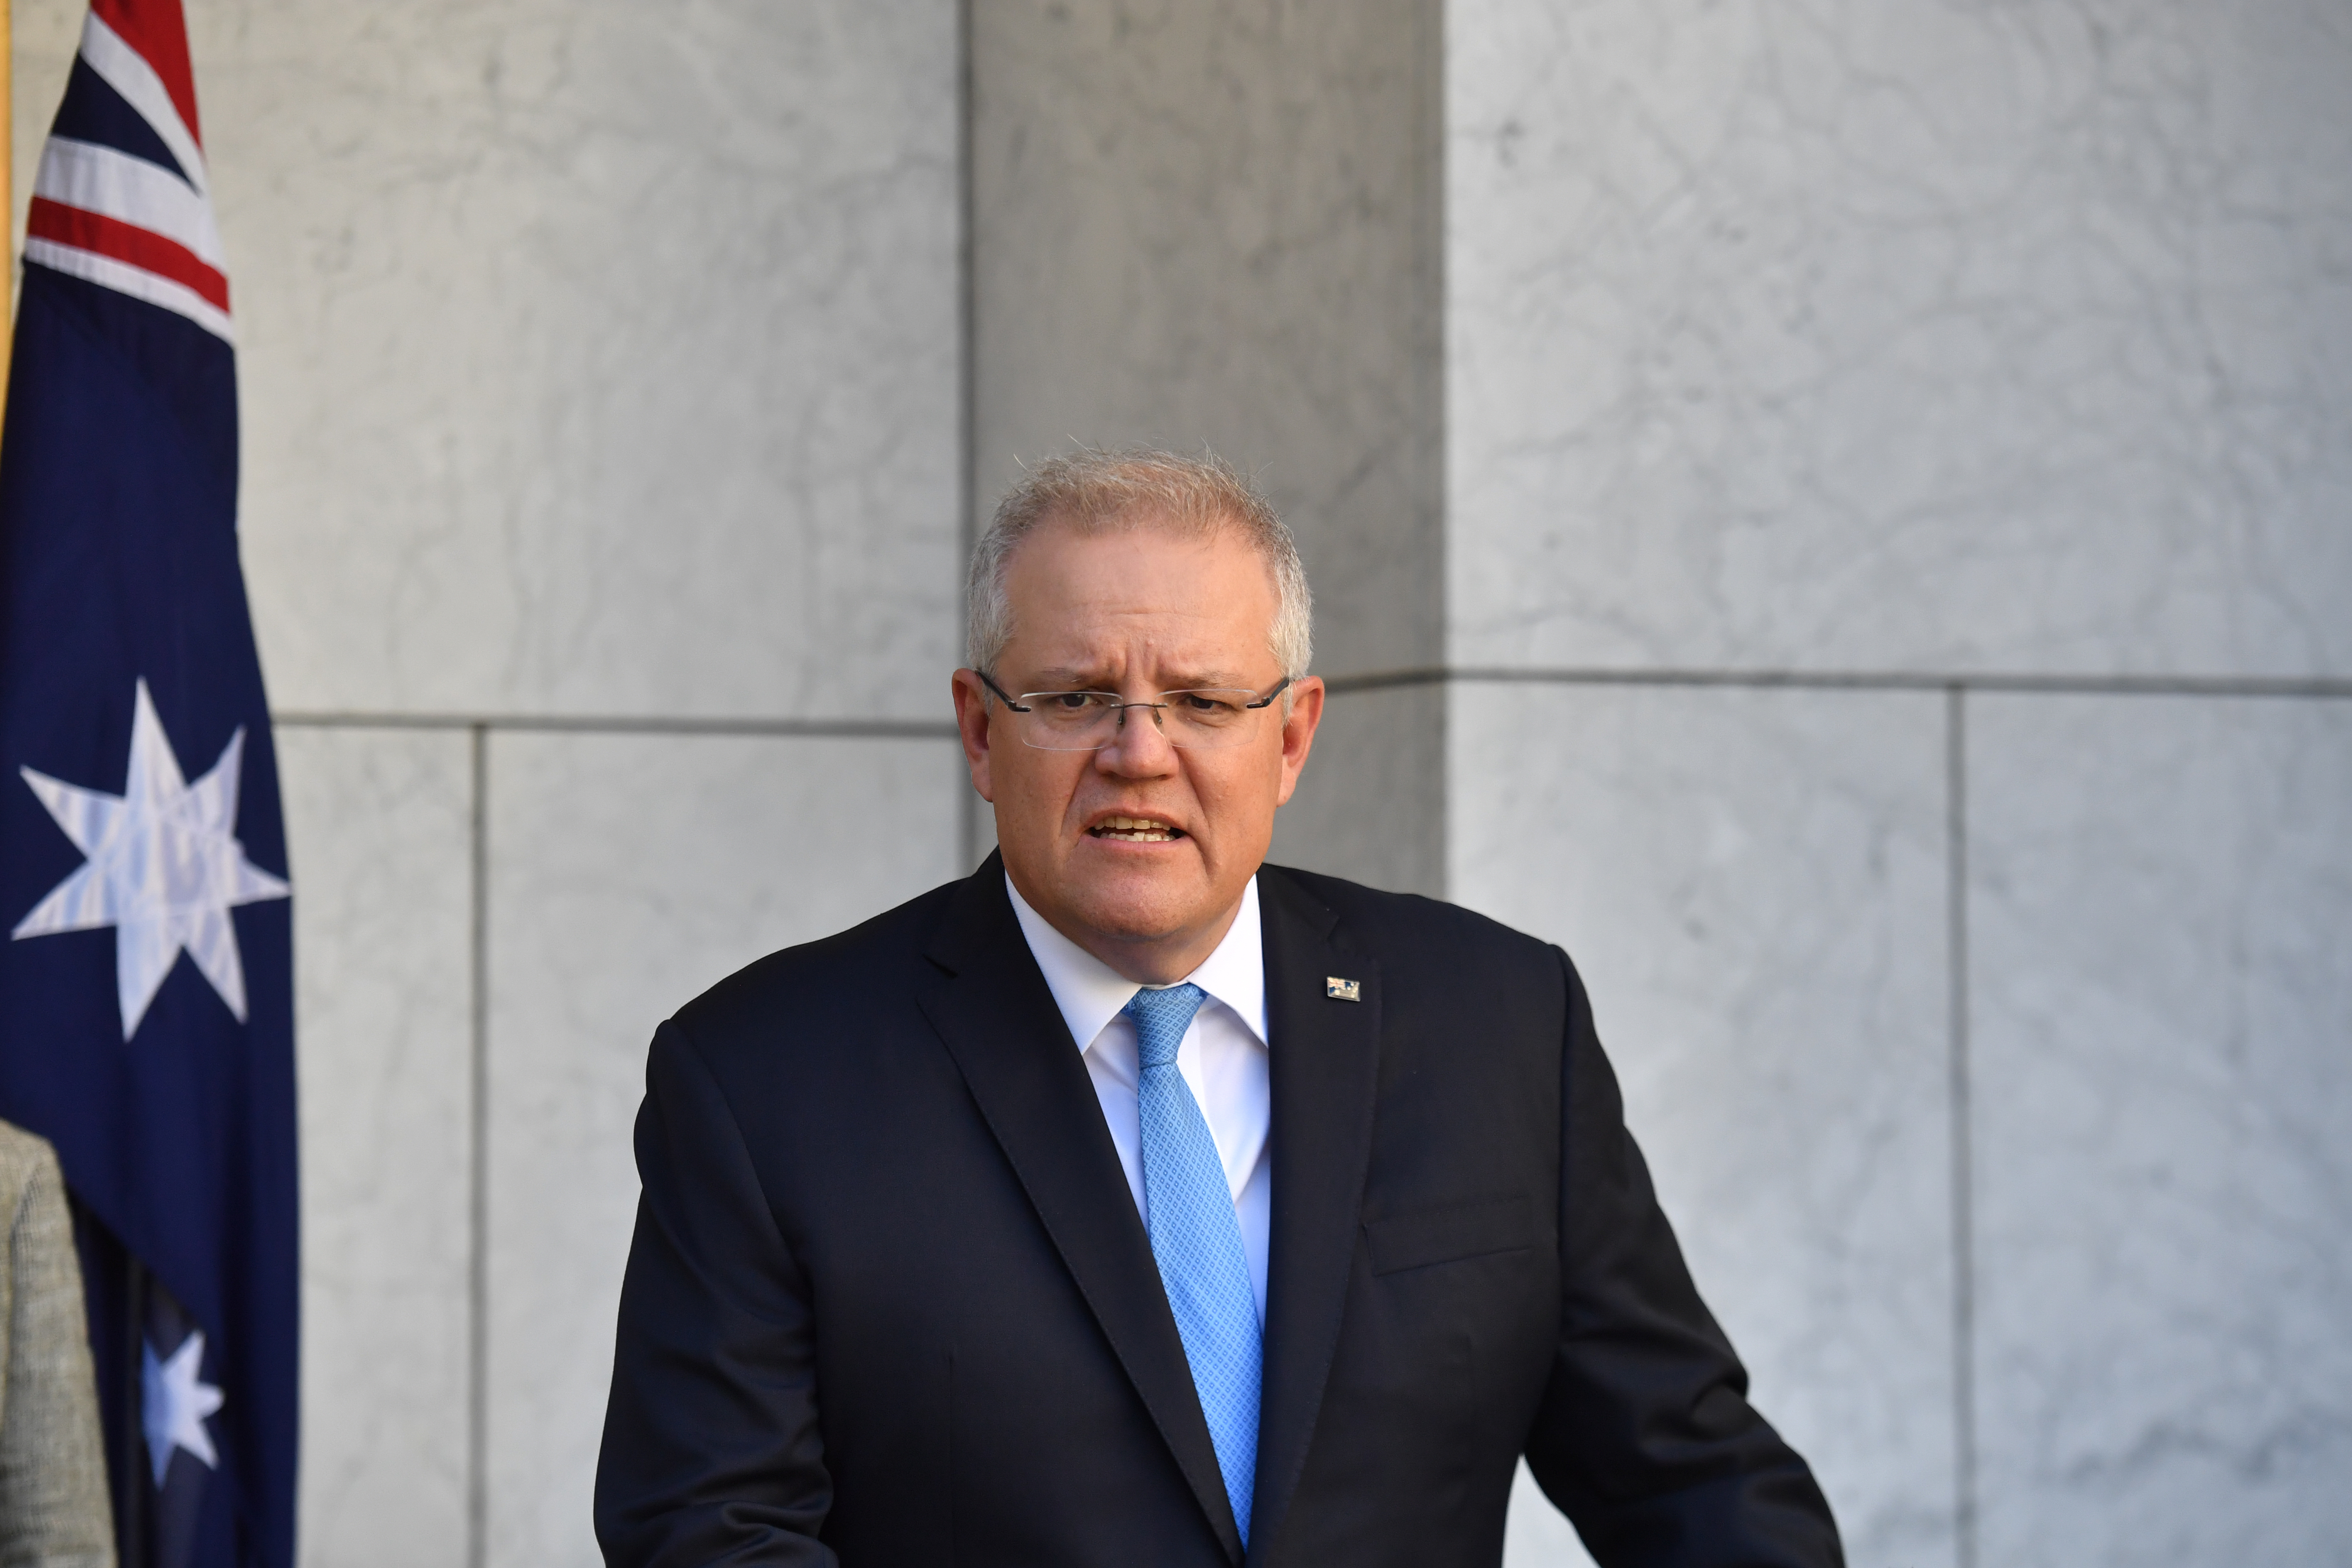 ScoMo Just Unveiled A $48 Million Mental Health Care Plan To Deal With The Pandemic Fallout